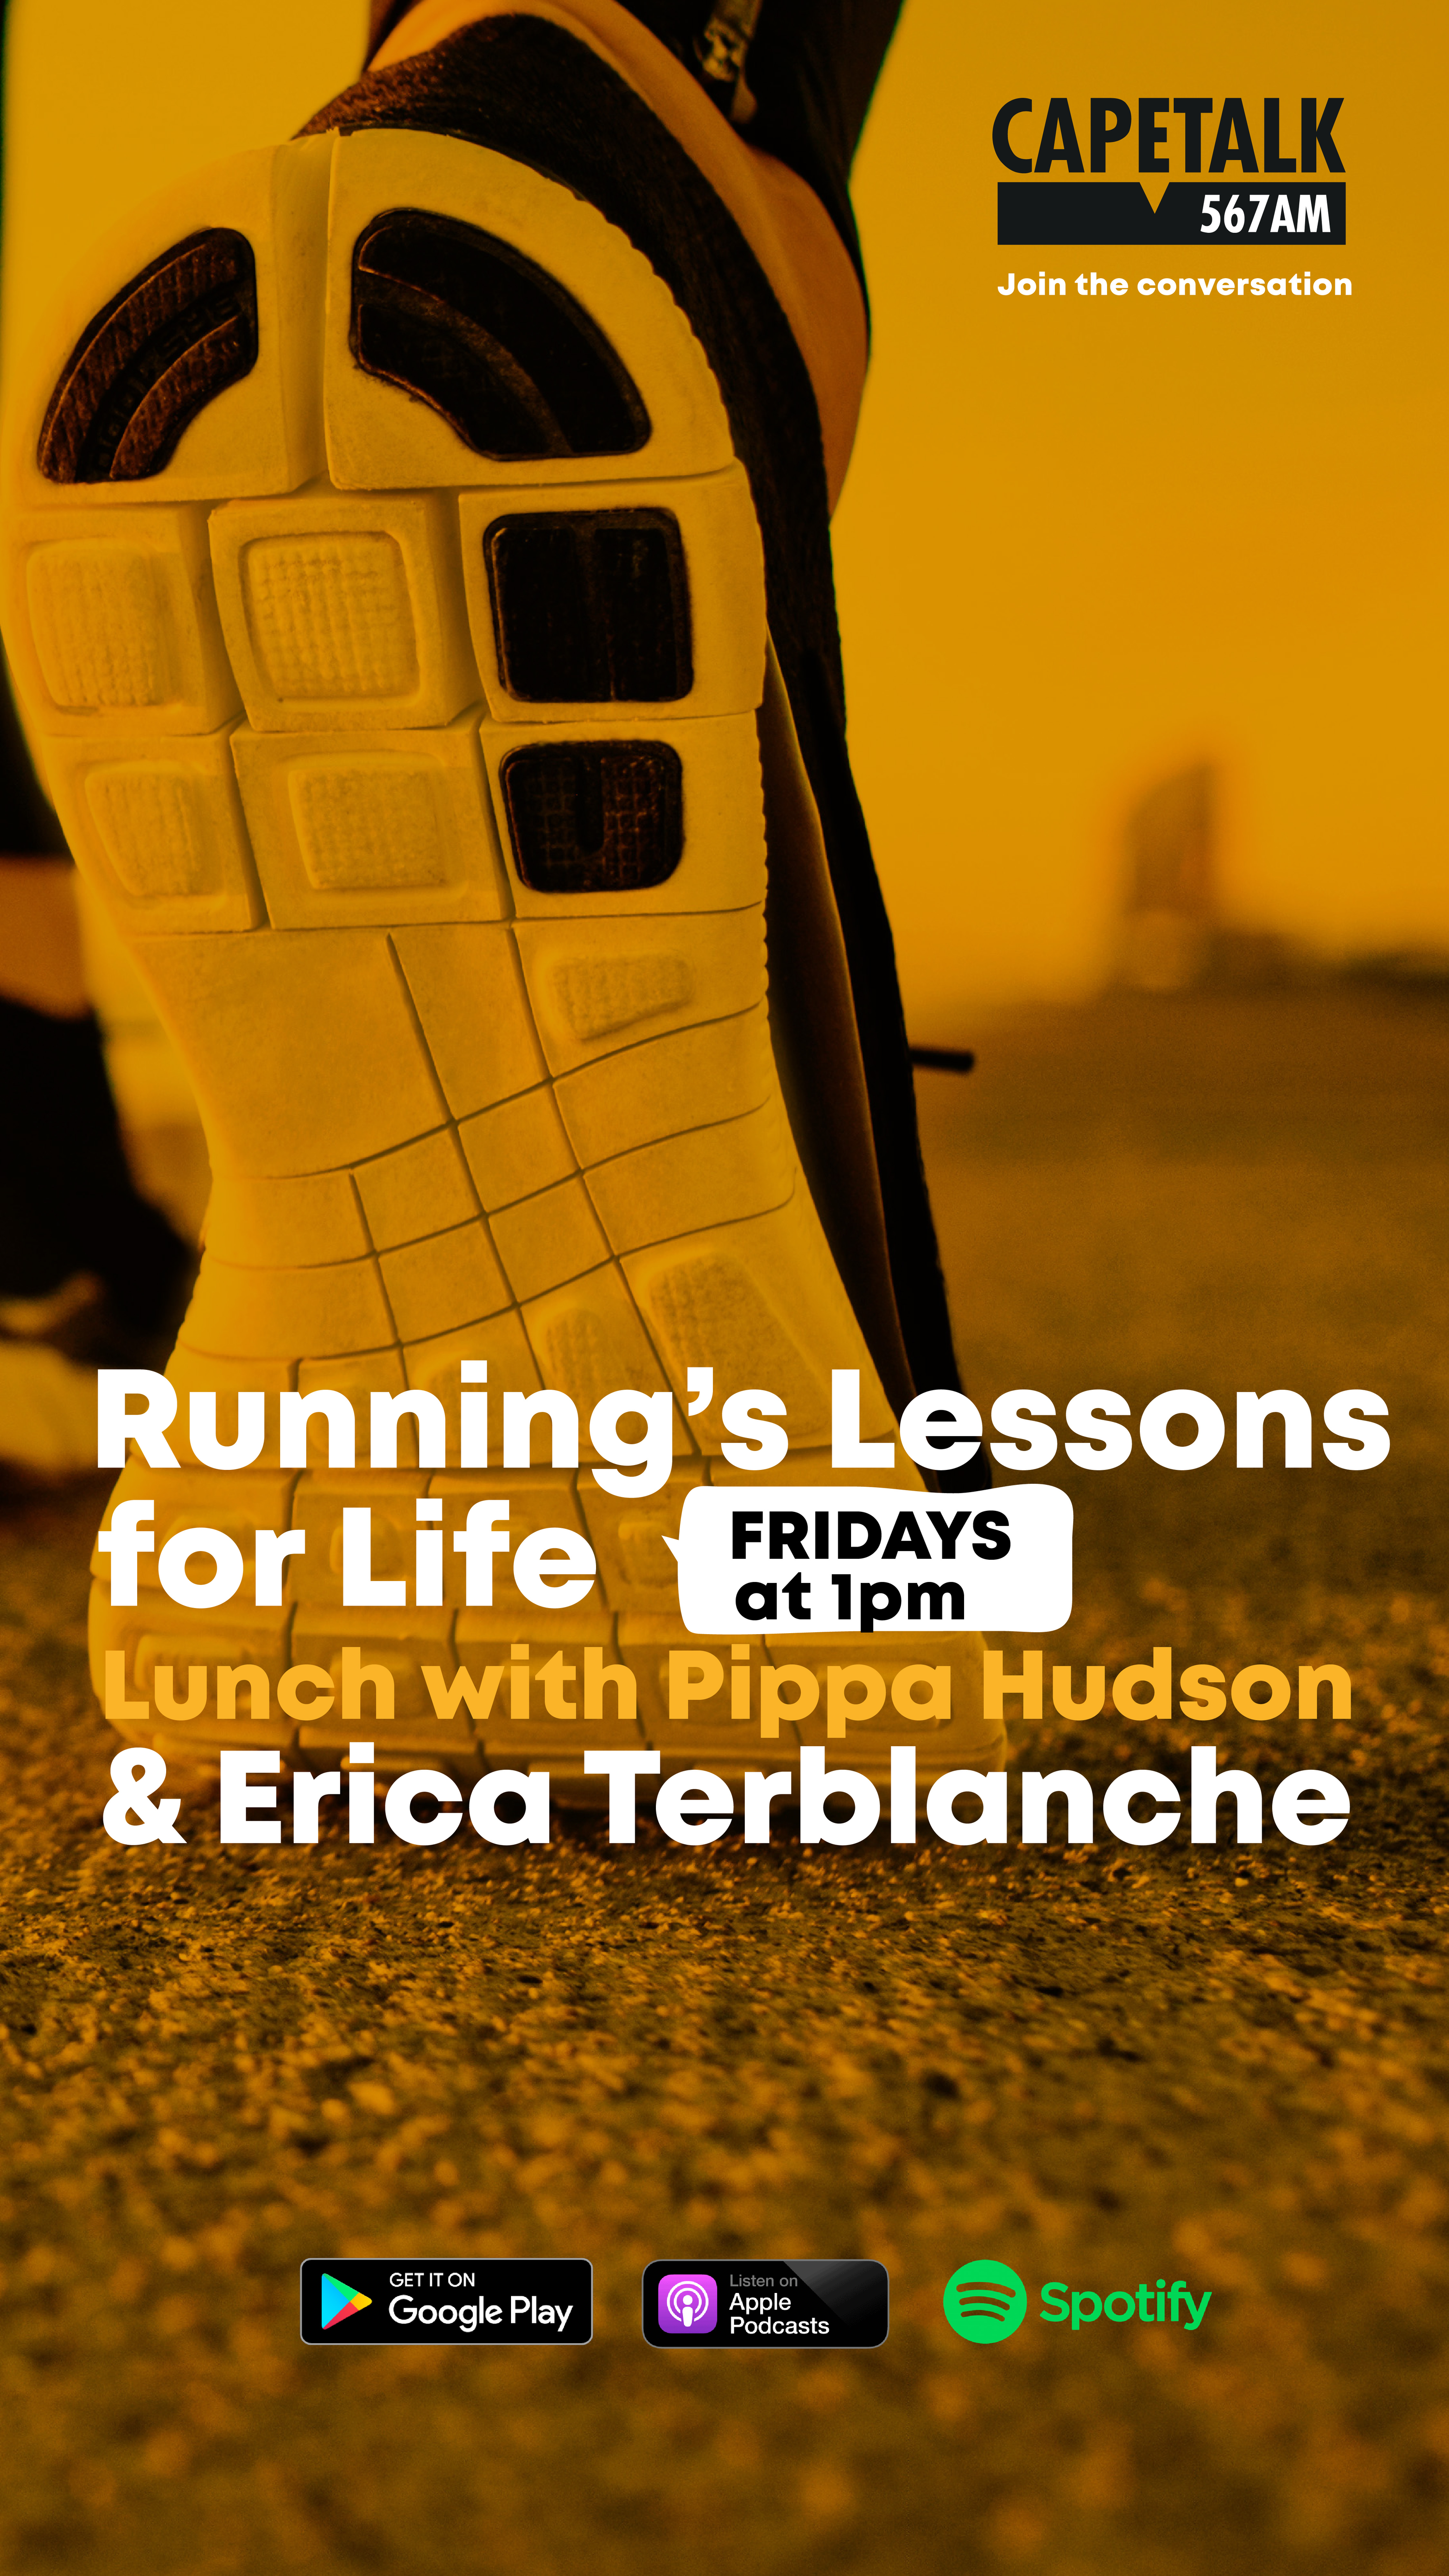 EPISODE 5: Running's Lessons for Life - Erica Terblanche